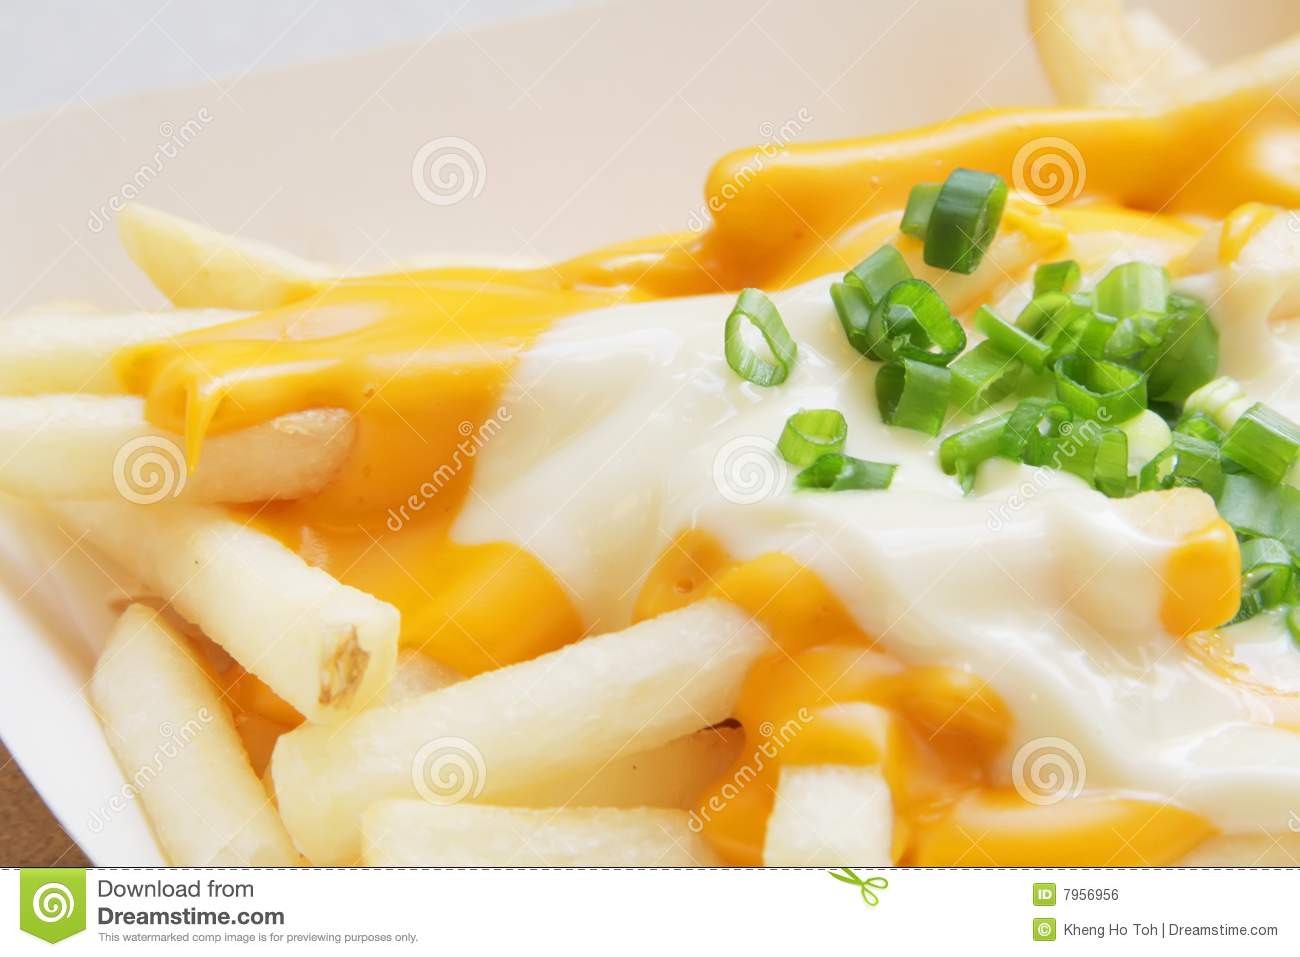 French Fries With Melted Cheese Royalty Free Stock Image   Image    